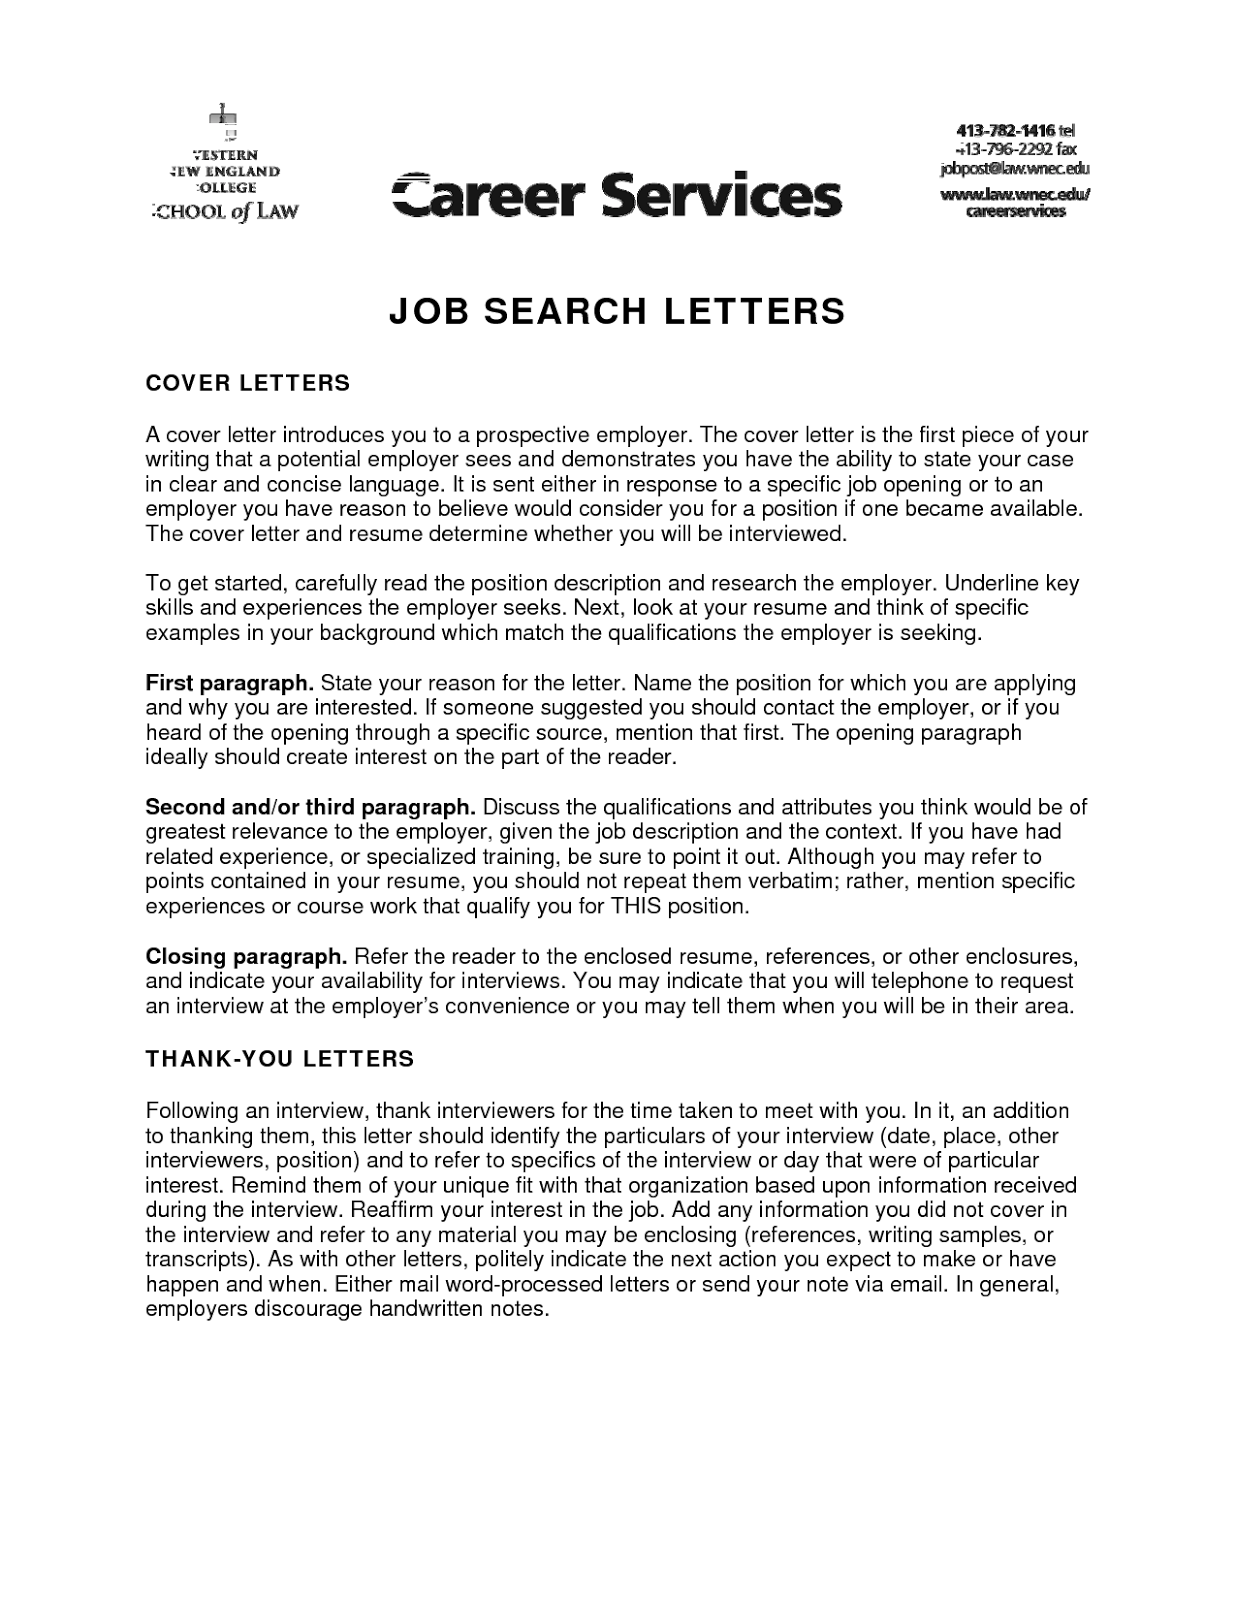 Career resume search site